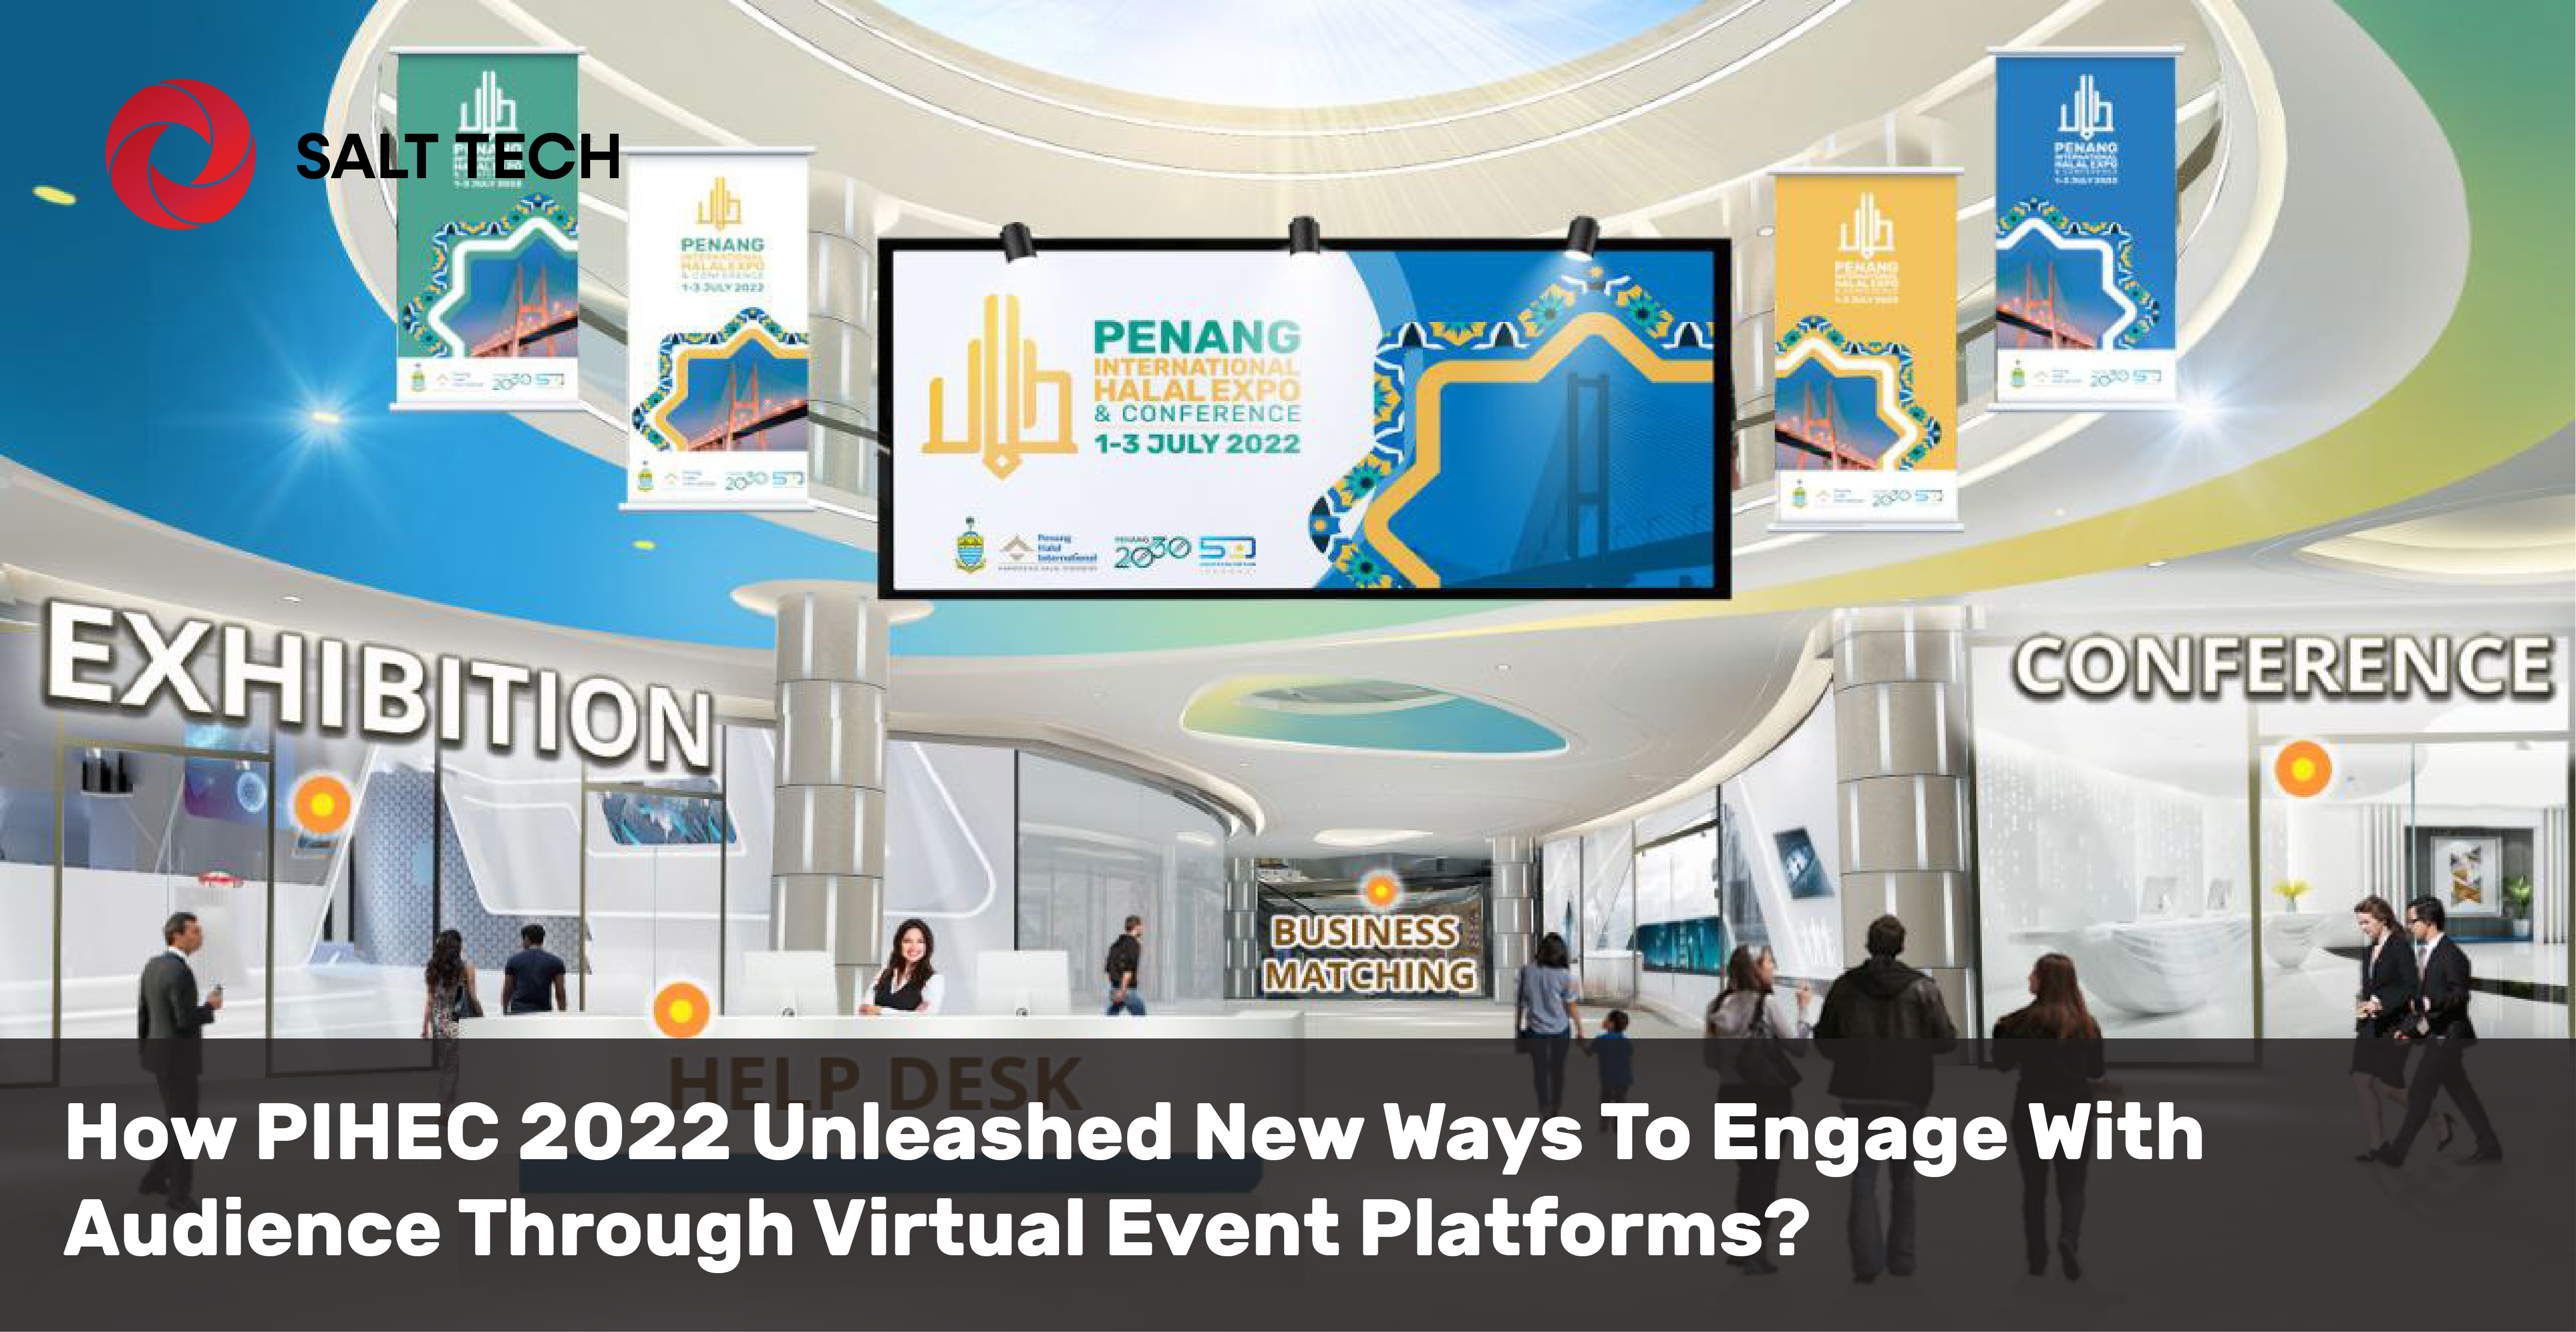 SALT TECH- How PIHEC 2022 Unleashed New Ways To Engage With Audience Through Virtual Event Platforms?